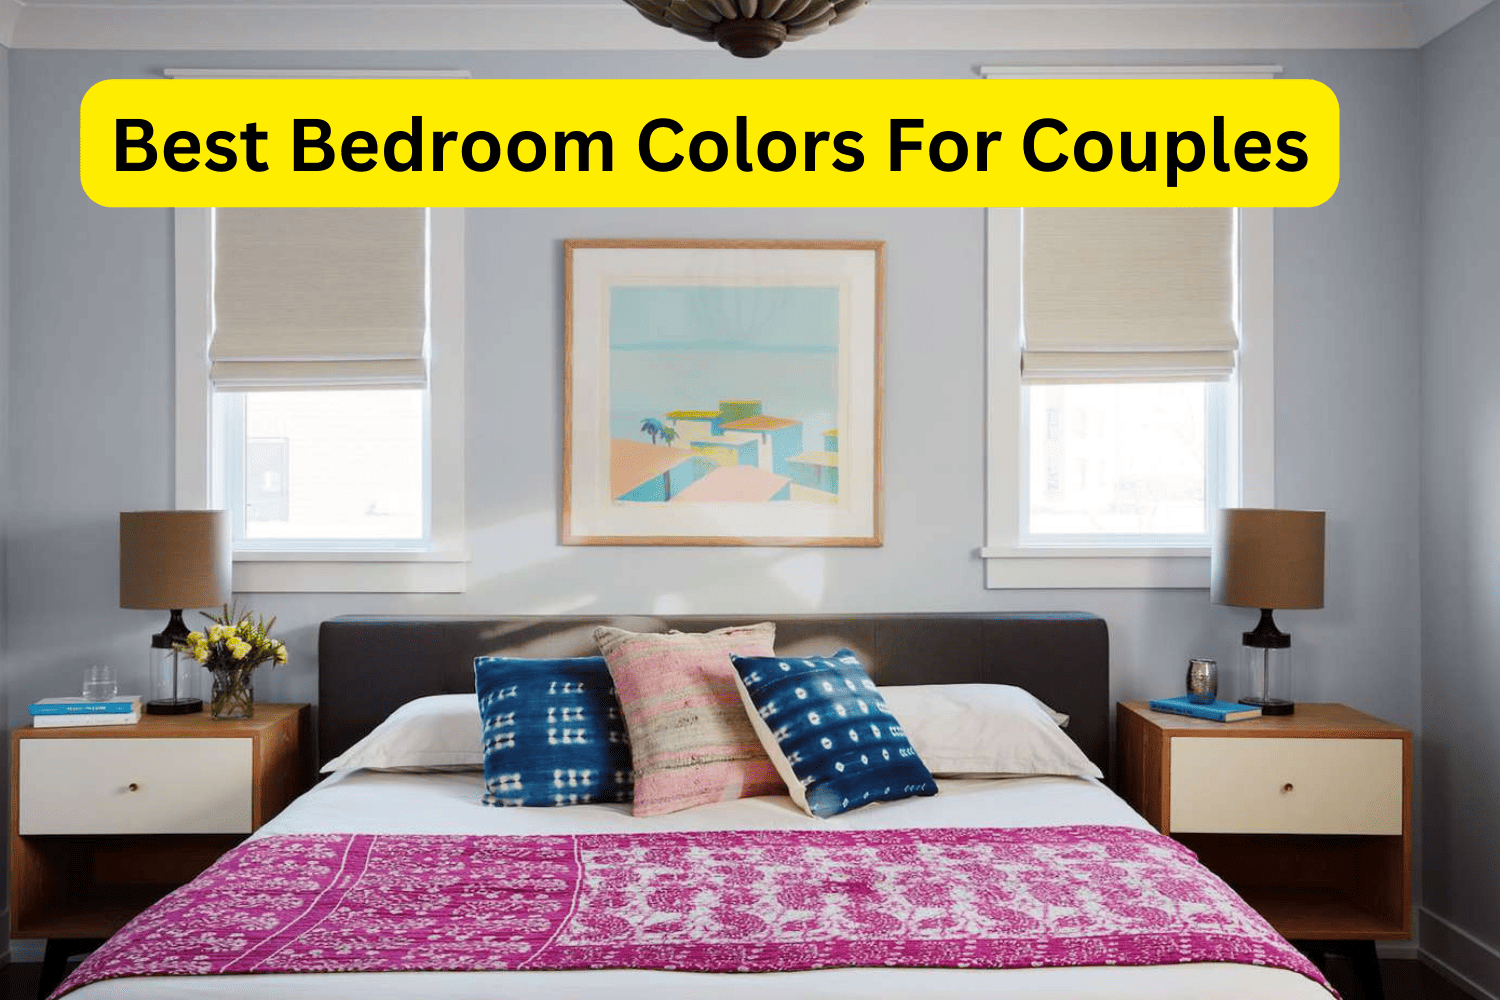 Best Bedroom Colors For Couples